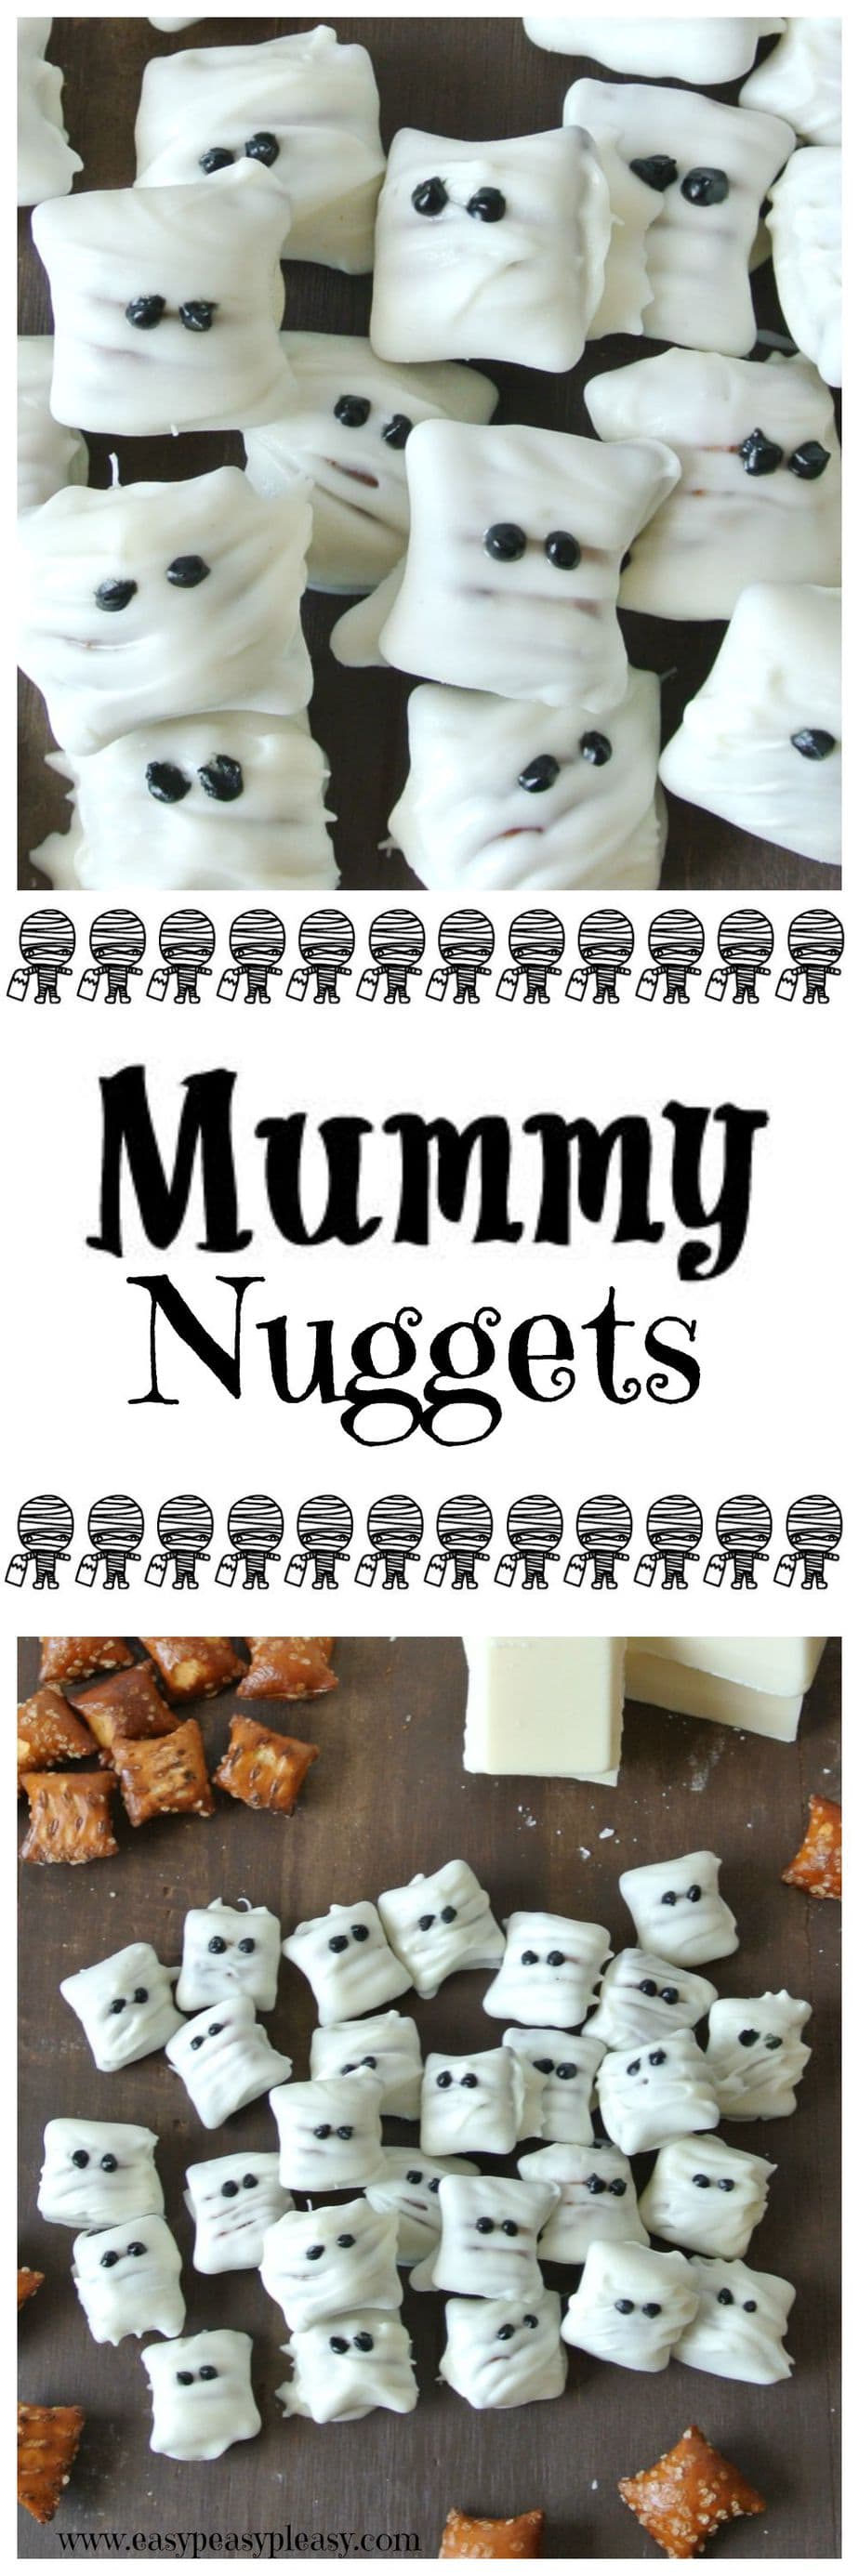 No tricks here, only treats! These 3 Ingredient Mummy Nuggets are the perfect Halloween treat!